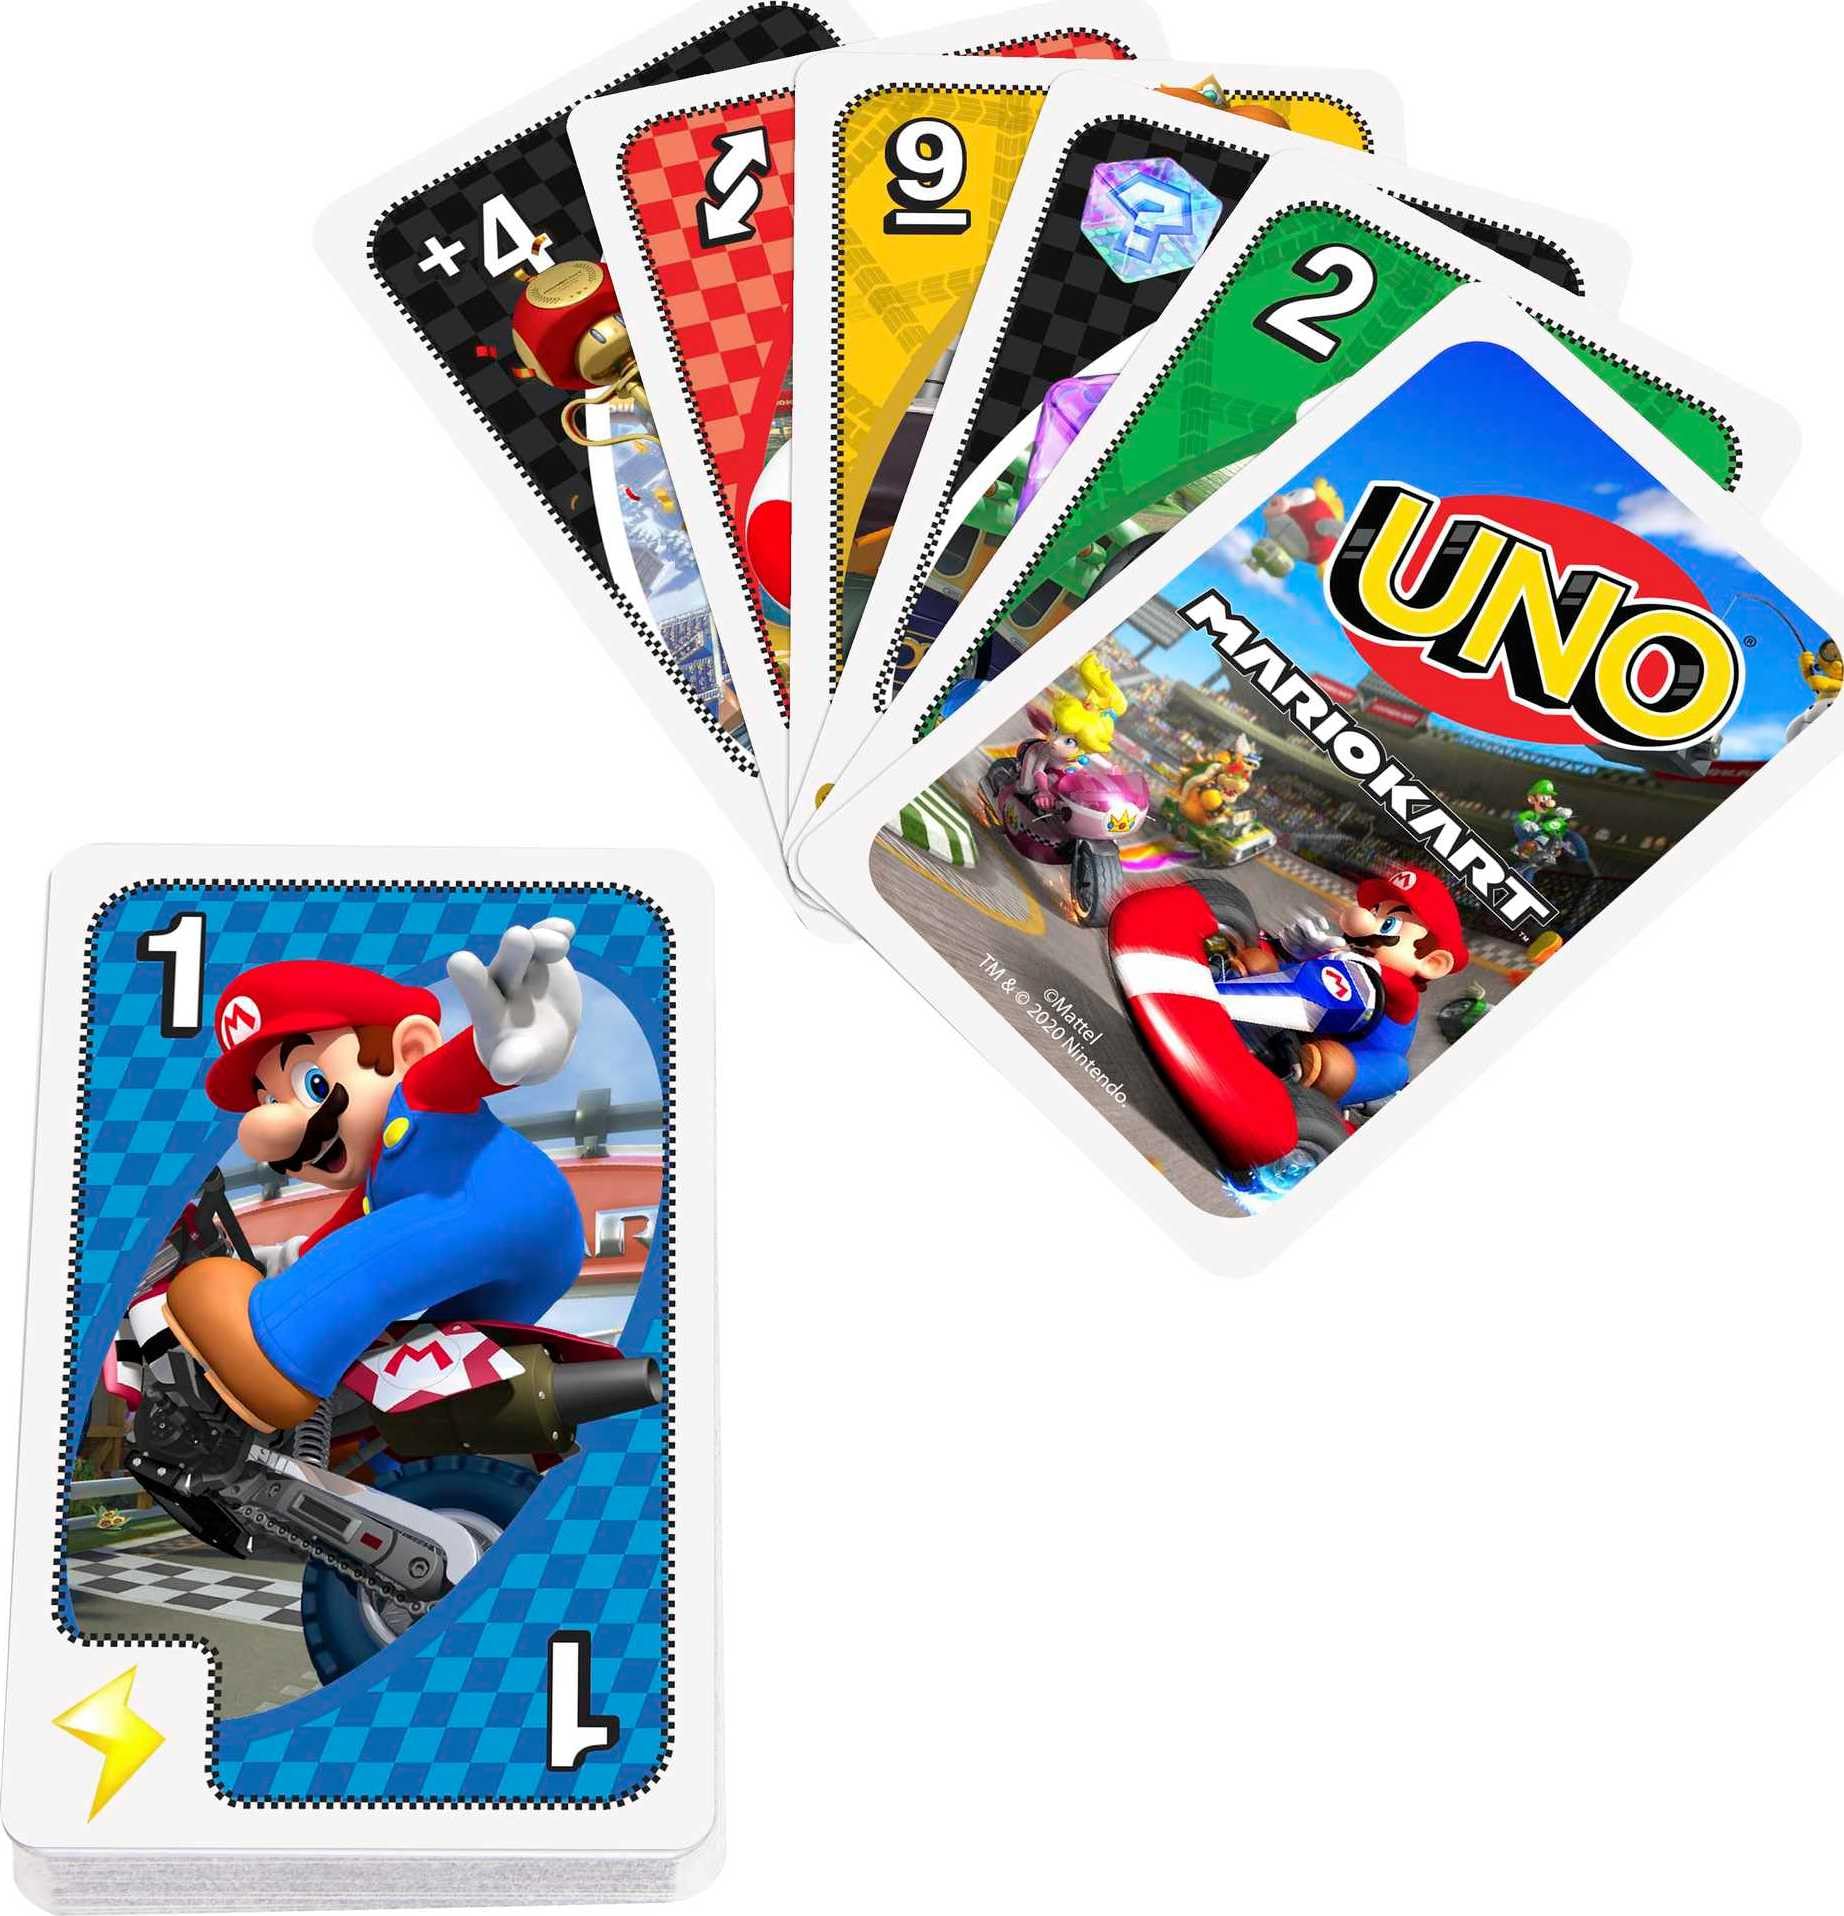 Mattel games UNO Mario Kart card game with 112 cards & Instructions for Players Ages 7 Years & Older, For Kid, Family and Adult 